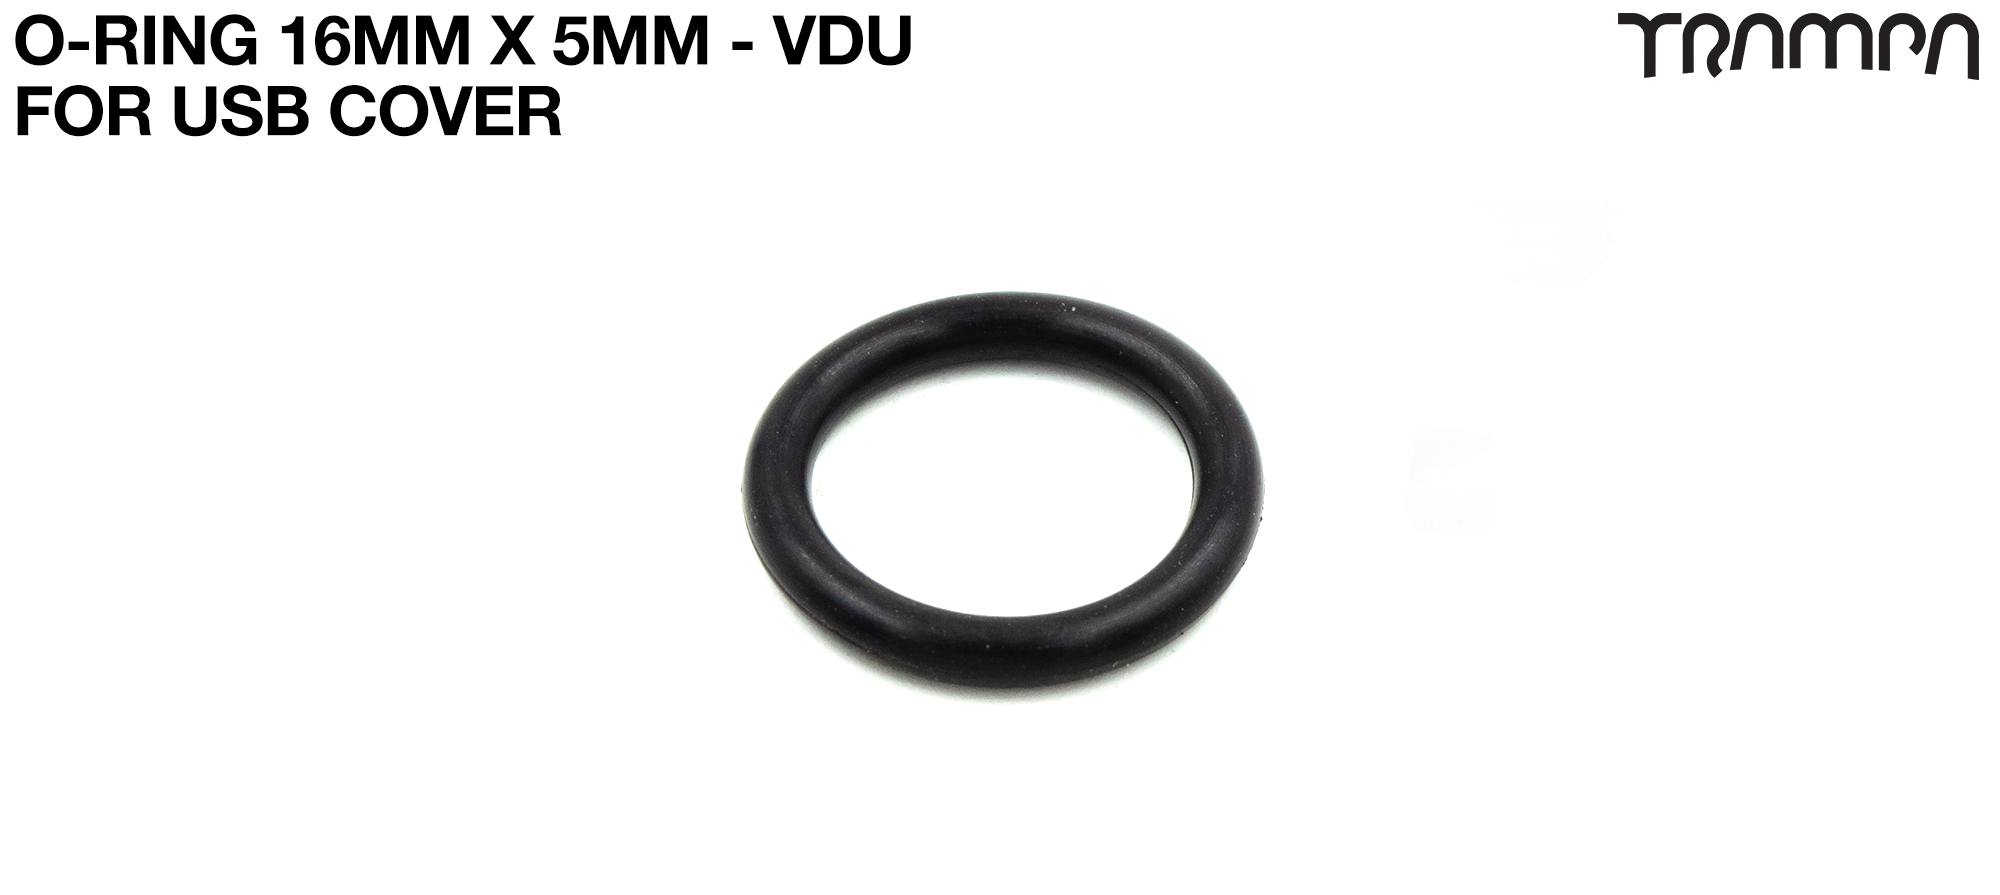 VESC DISPLAY UNIT - O-Ring 16mm x 5mm for USB Cover 